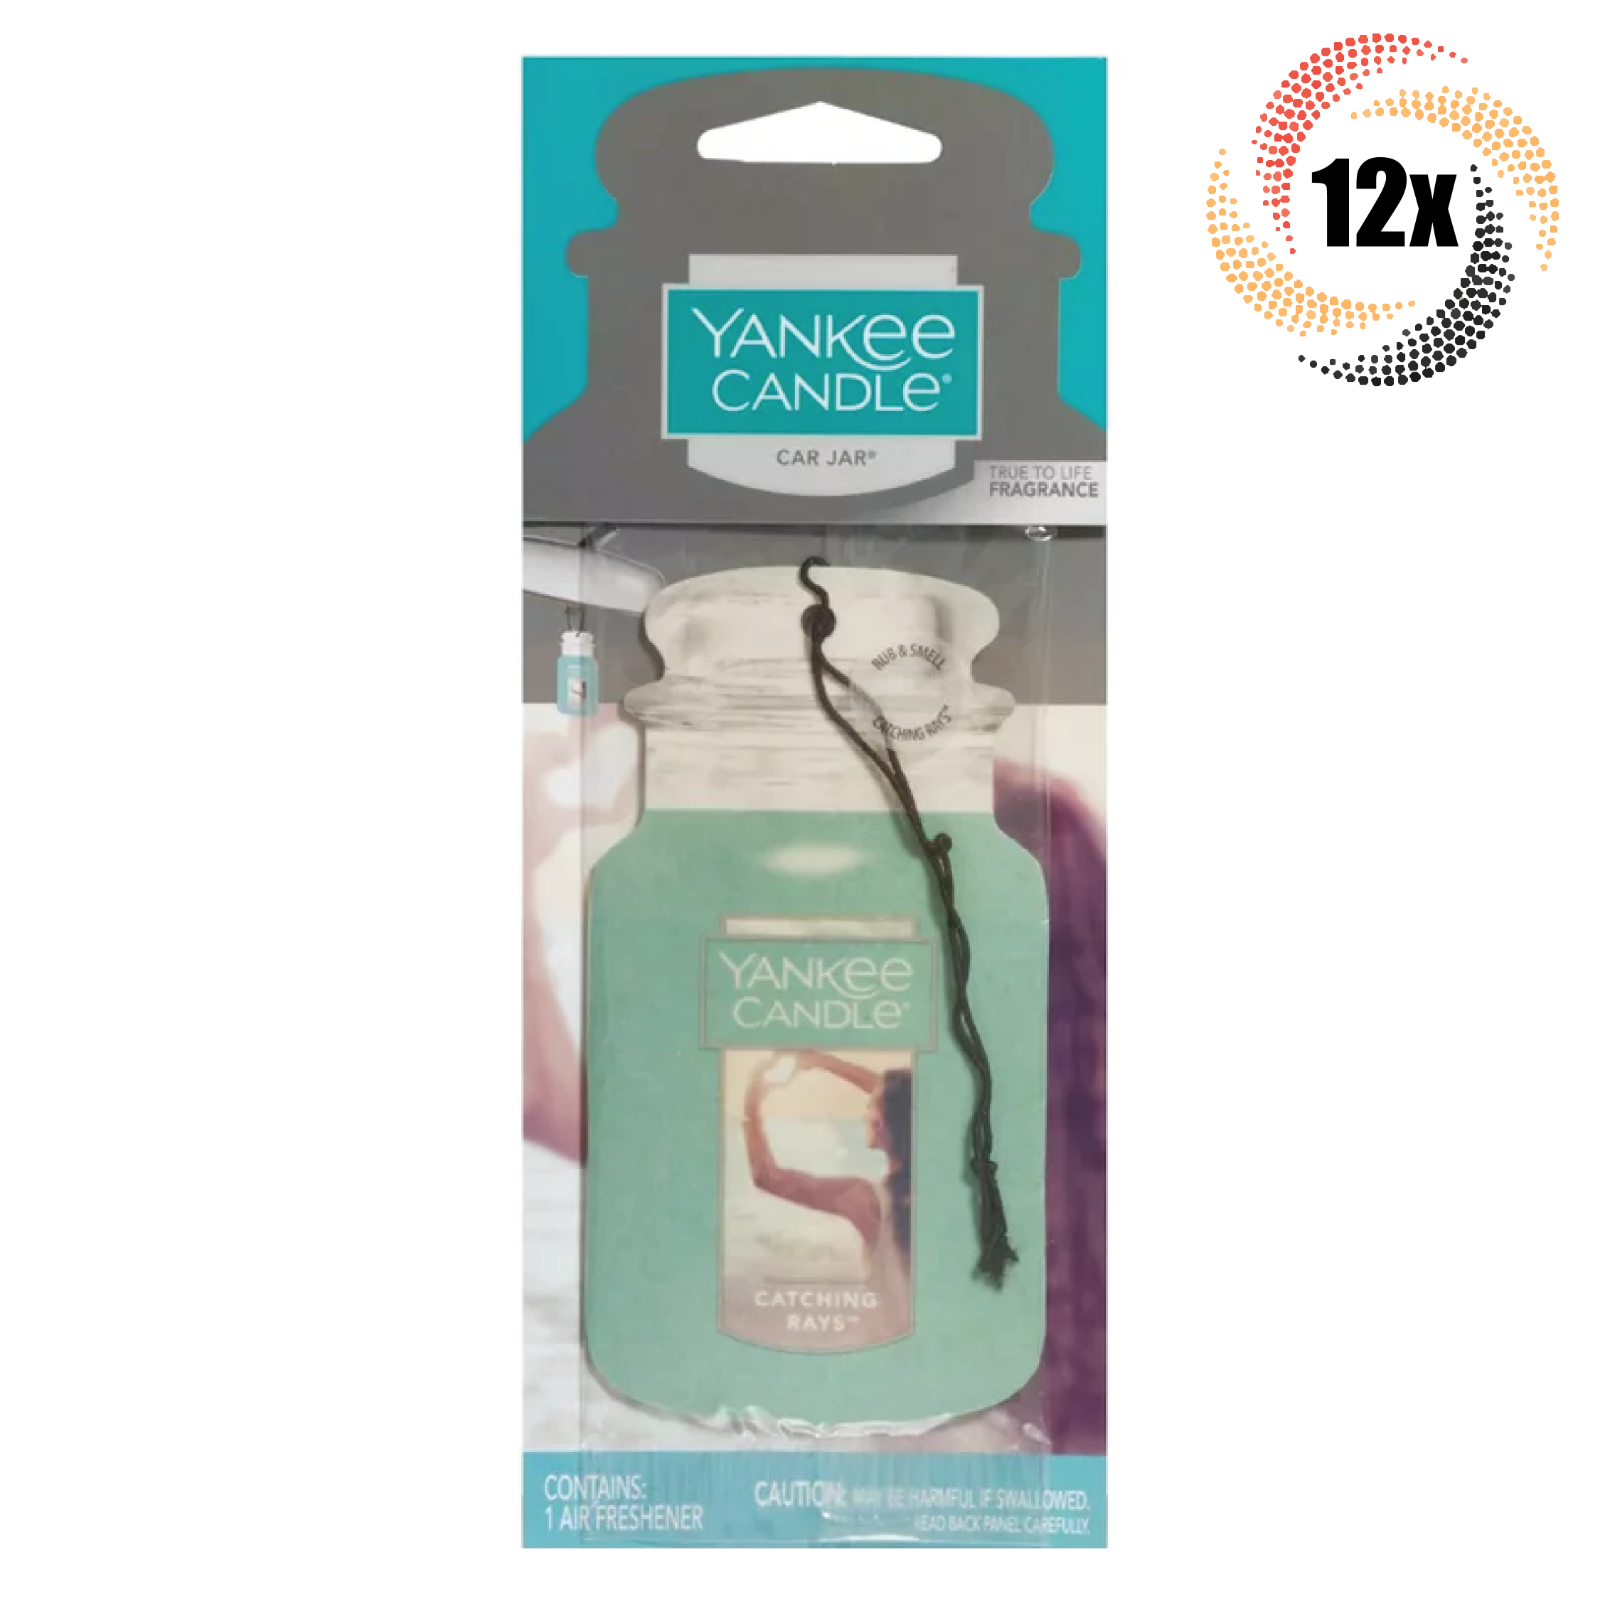 Primary image for 12x Packs Yankee Candle Jar Car Hanging Air Freshener | Catching Rays Scent